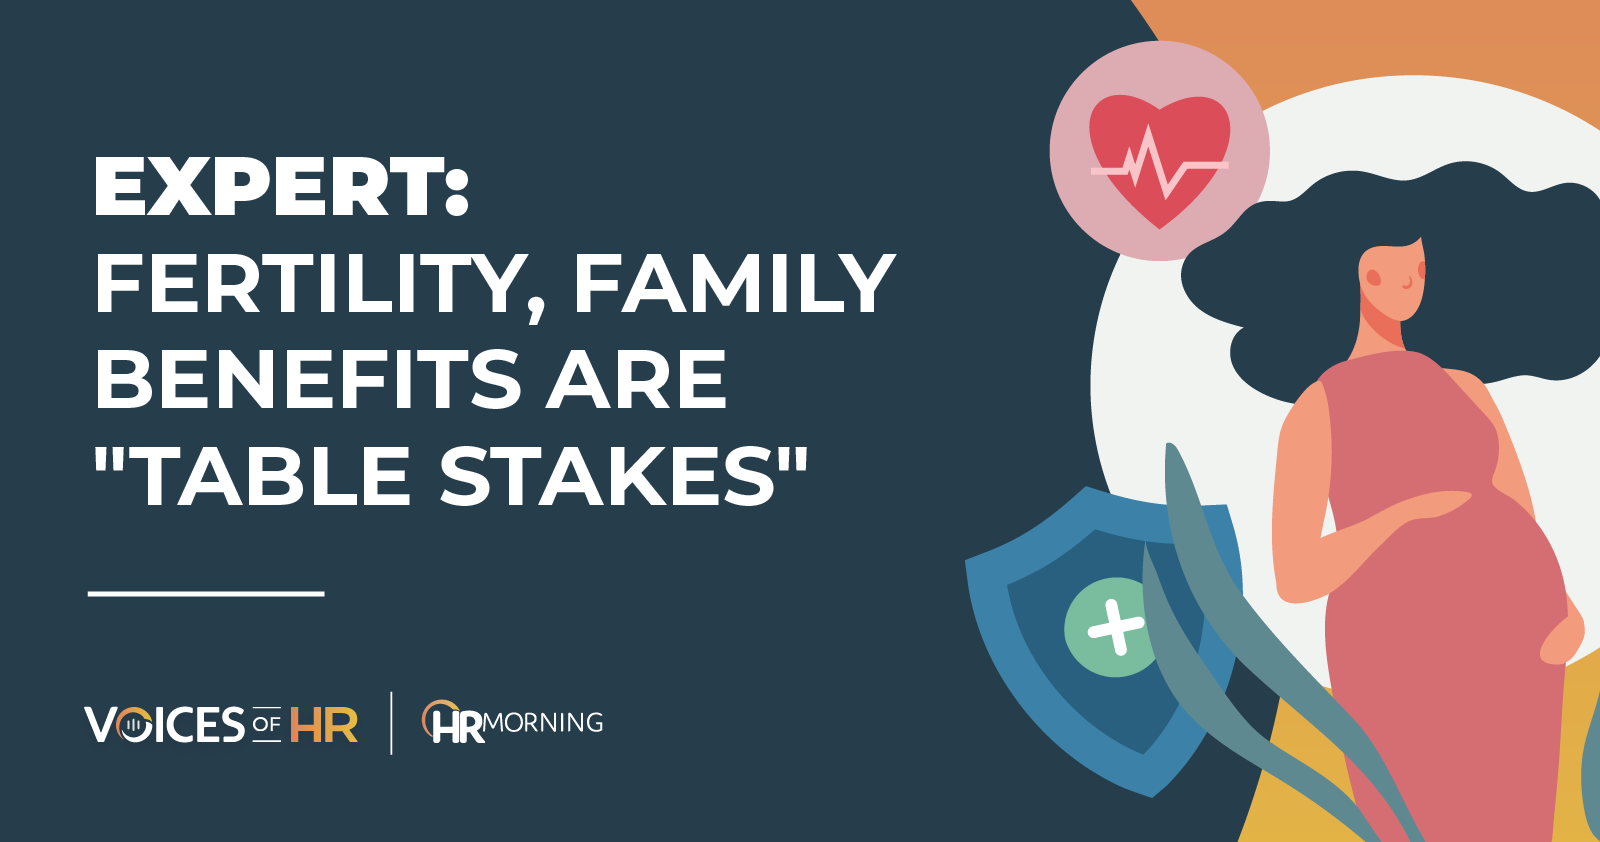 Expert: Fertility, family benefits are "table stakes"